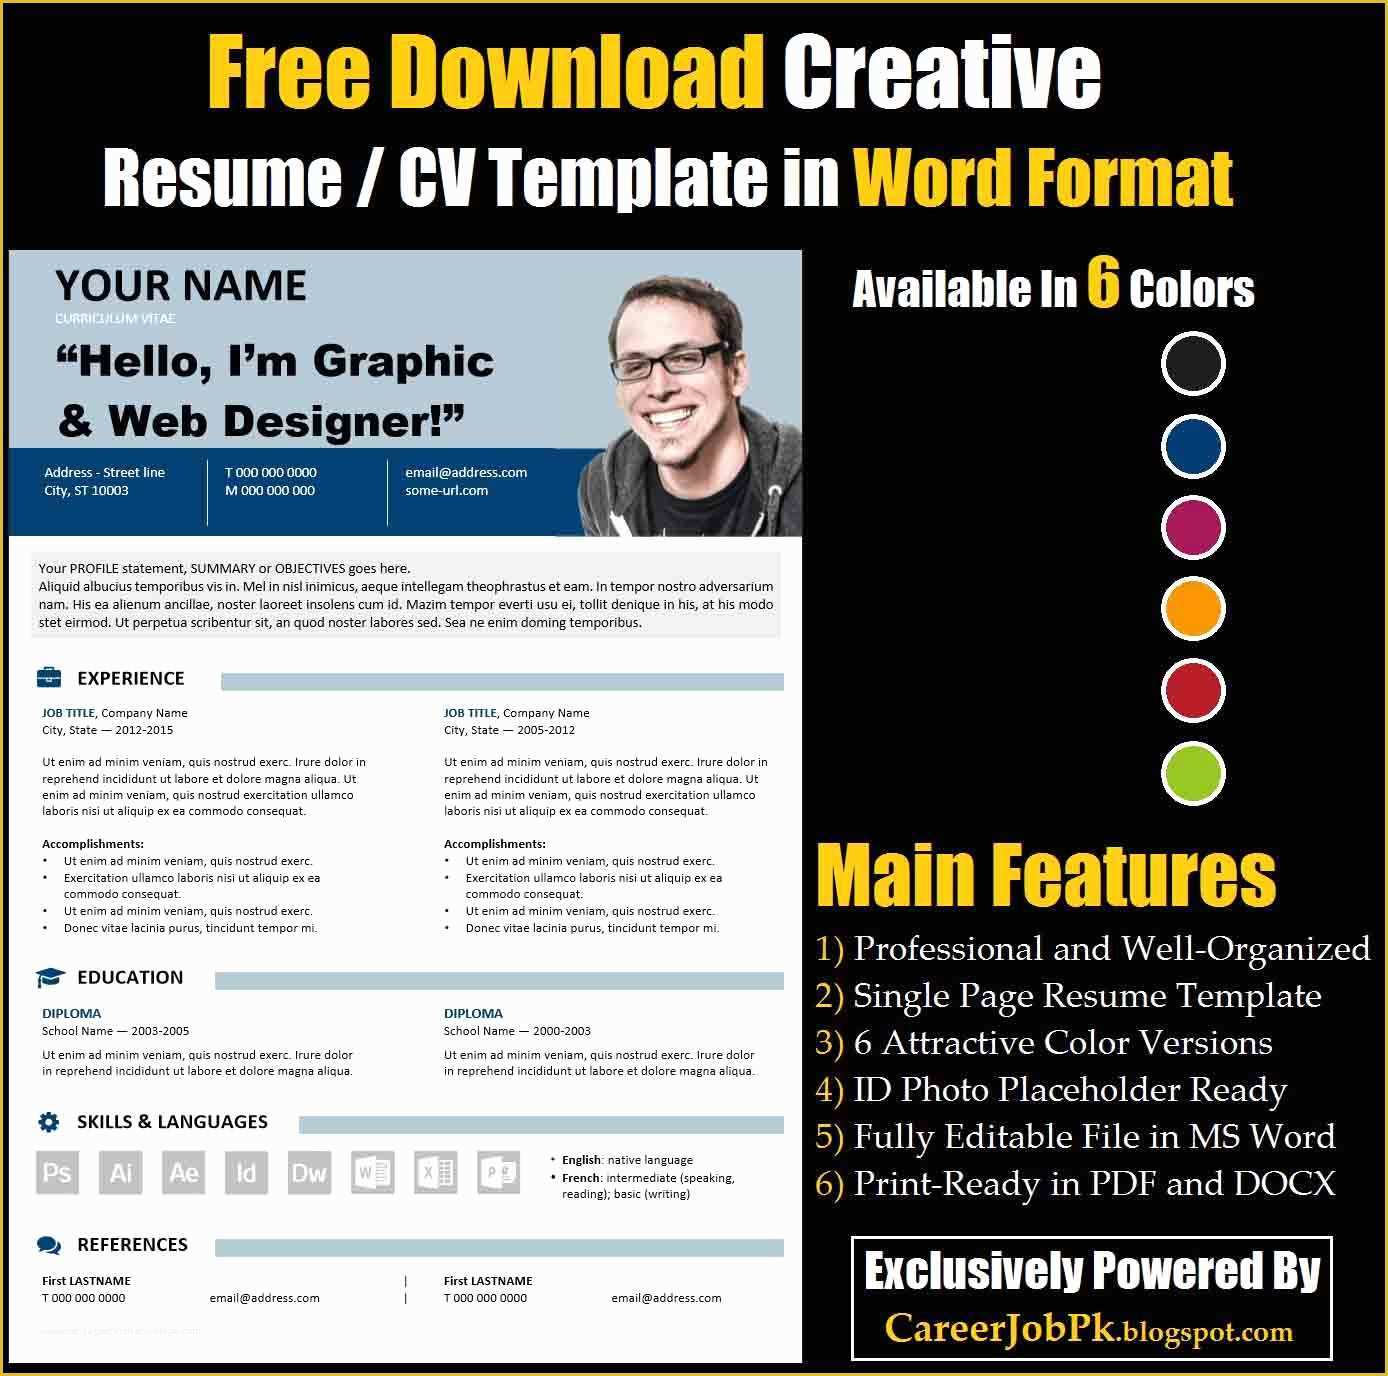 Creative Word Resume Templates Free Of Free Download Editable Resume Cv Template In Ms Word format